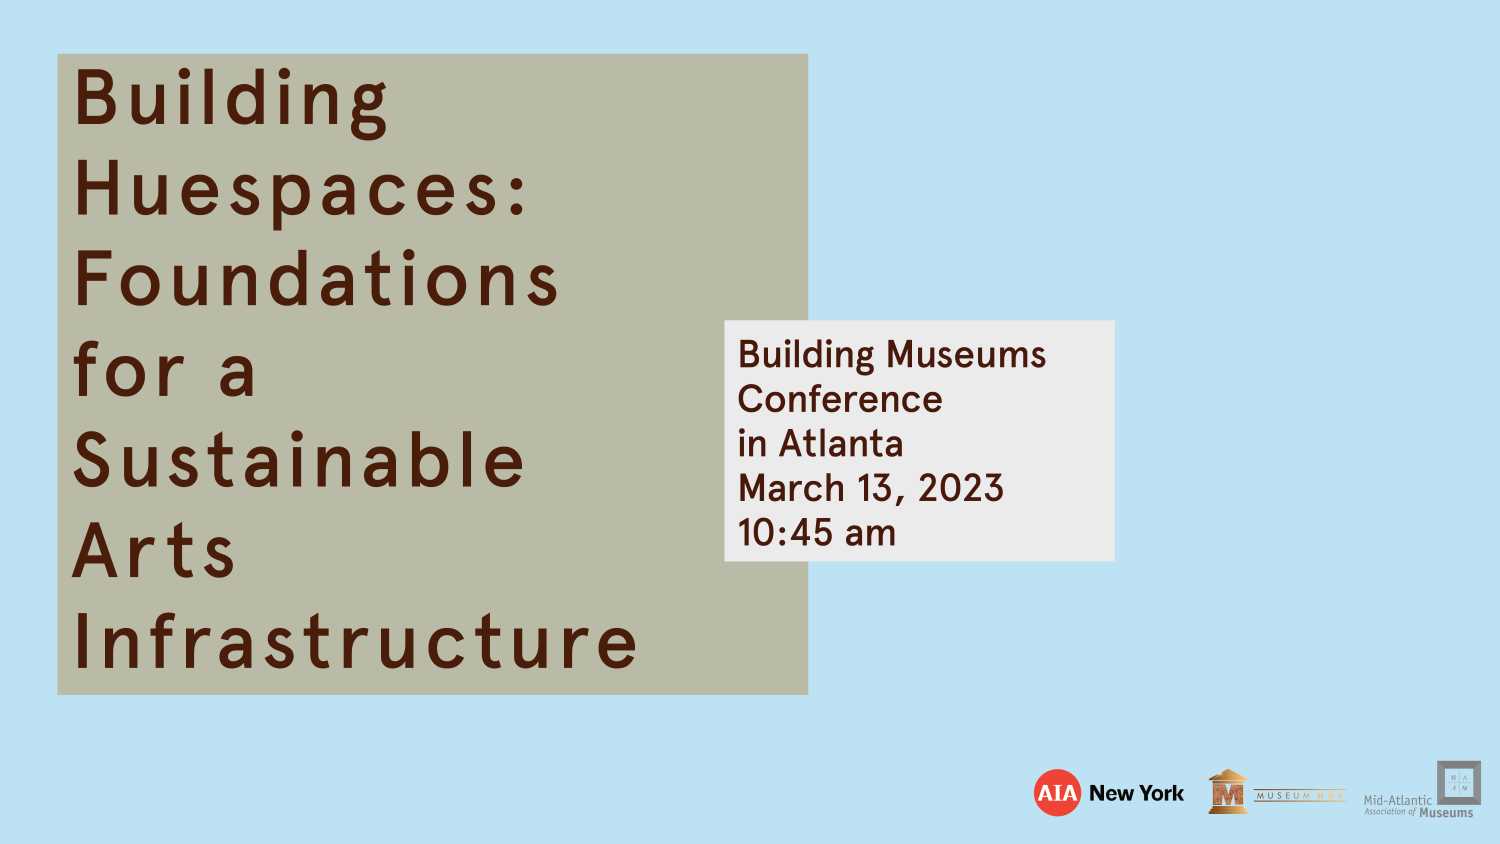 Building HueSpaces: Foundations for a Sustainable Arts Infrastructure will be held in Atlanta, Georgia on March 13, 2023, as part of [Mid-Atlanta Association of Museum's](http://midatlanticmuseums.org/) Building Museums Symposium.